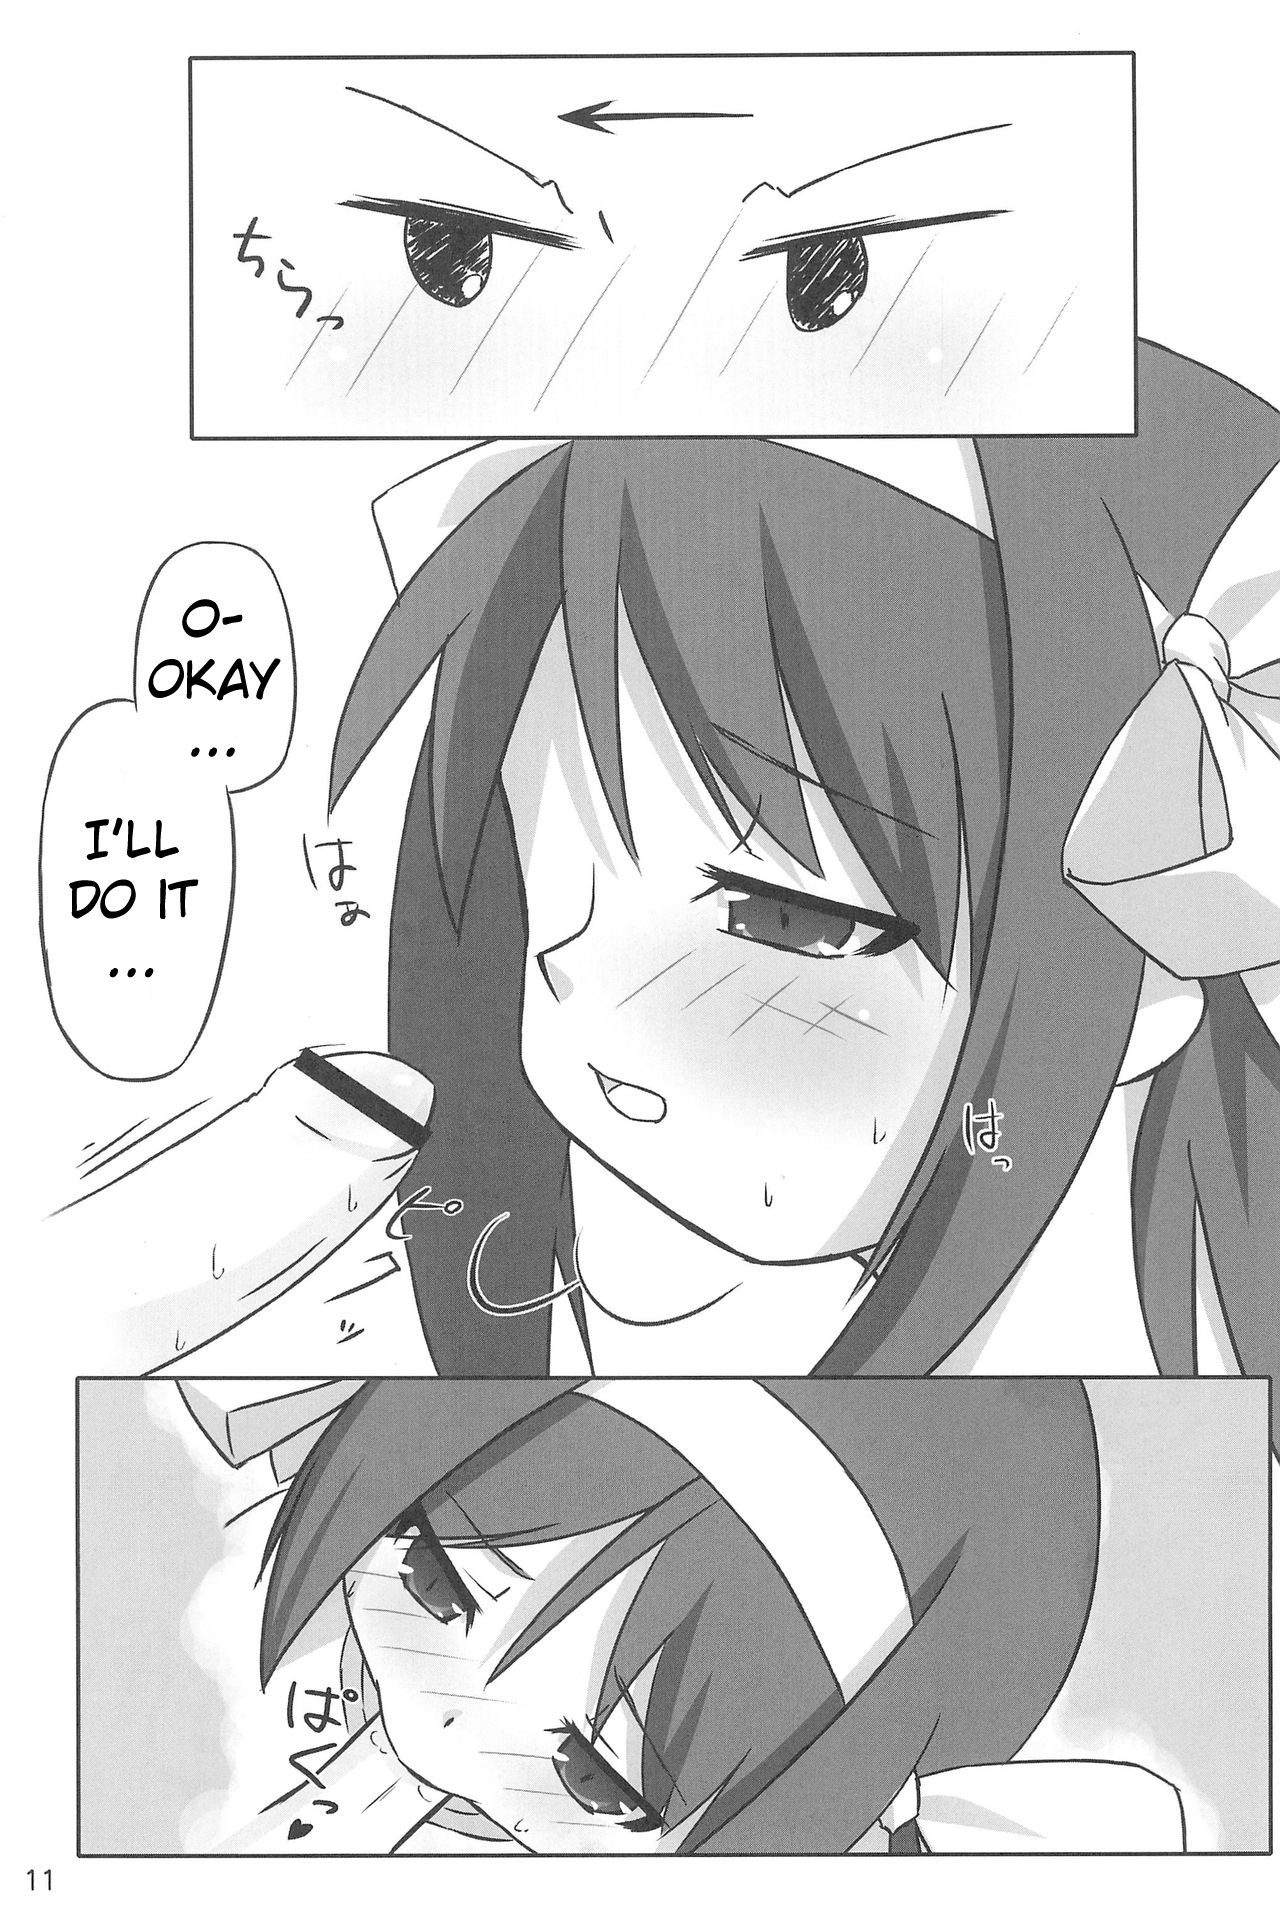 Tiny Angel Collection 3 hentai manga picture 11